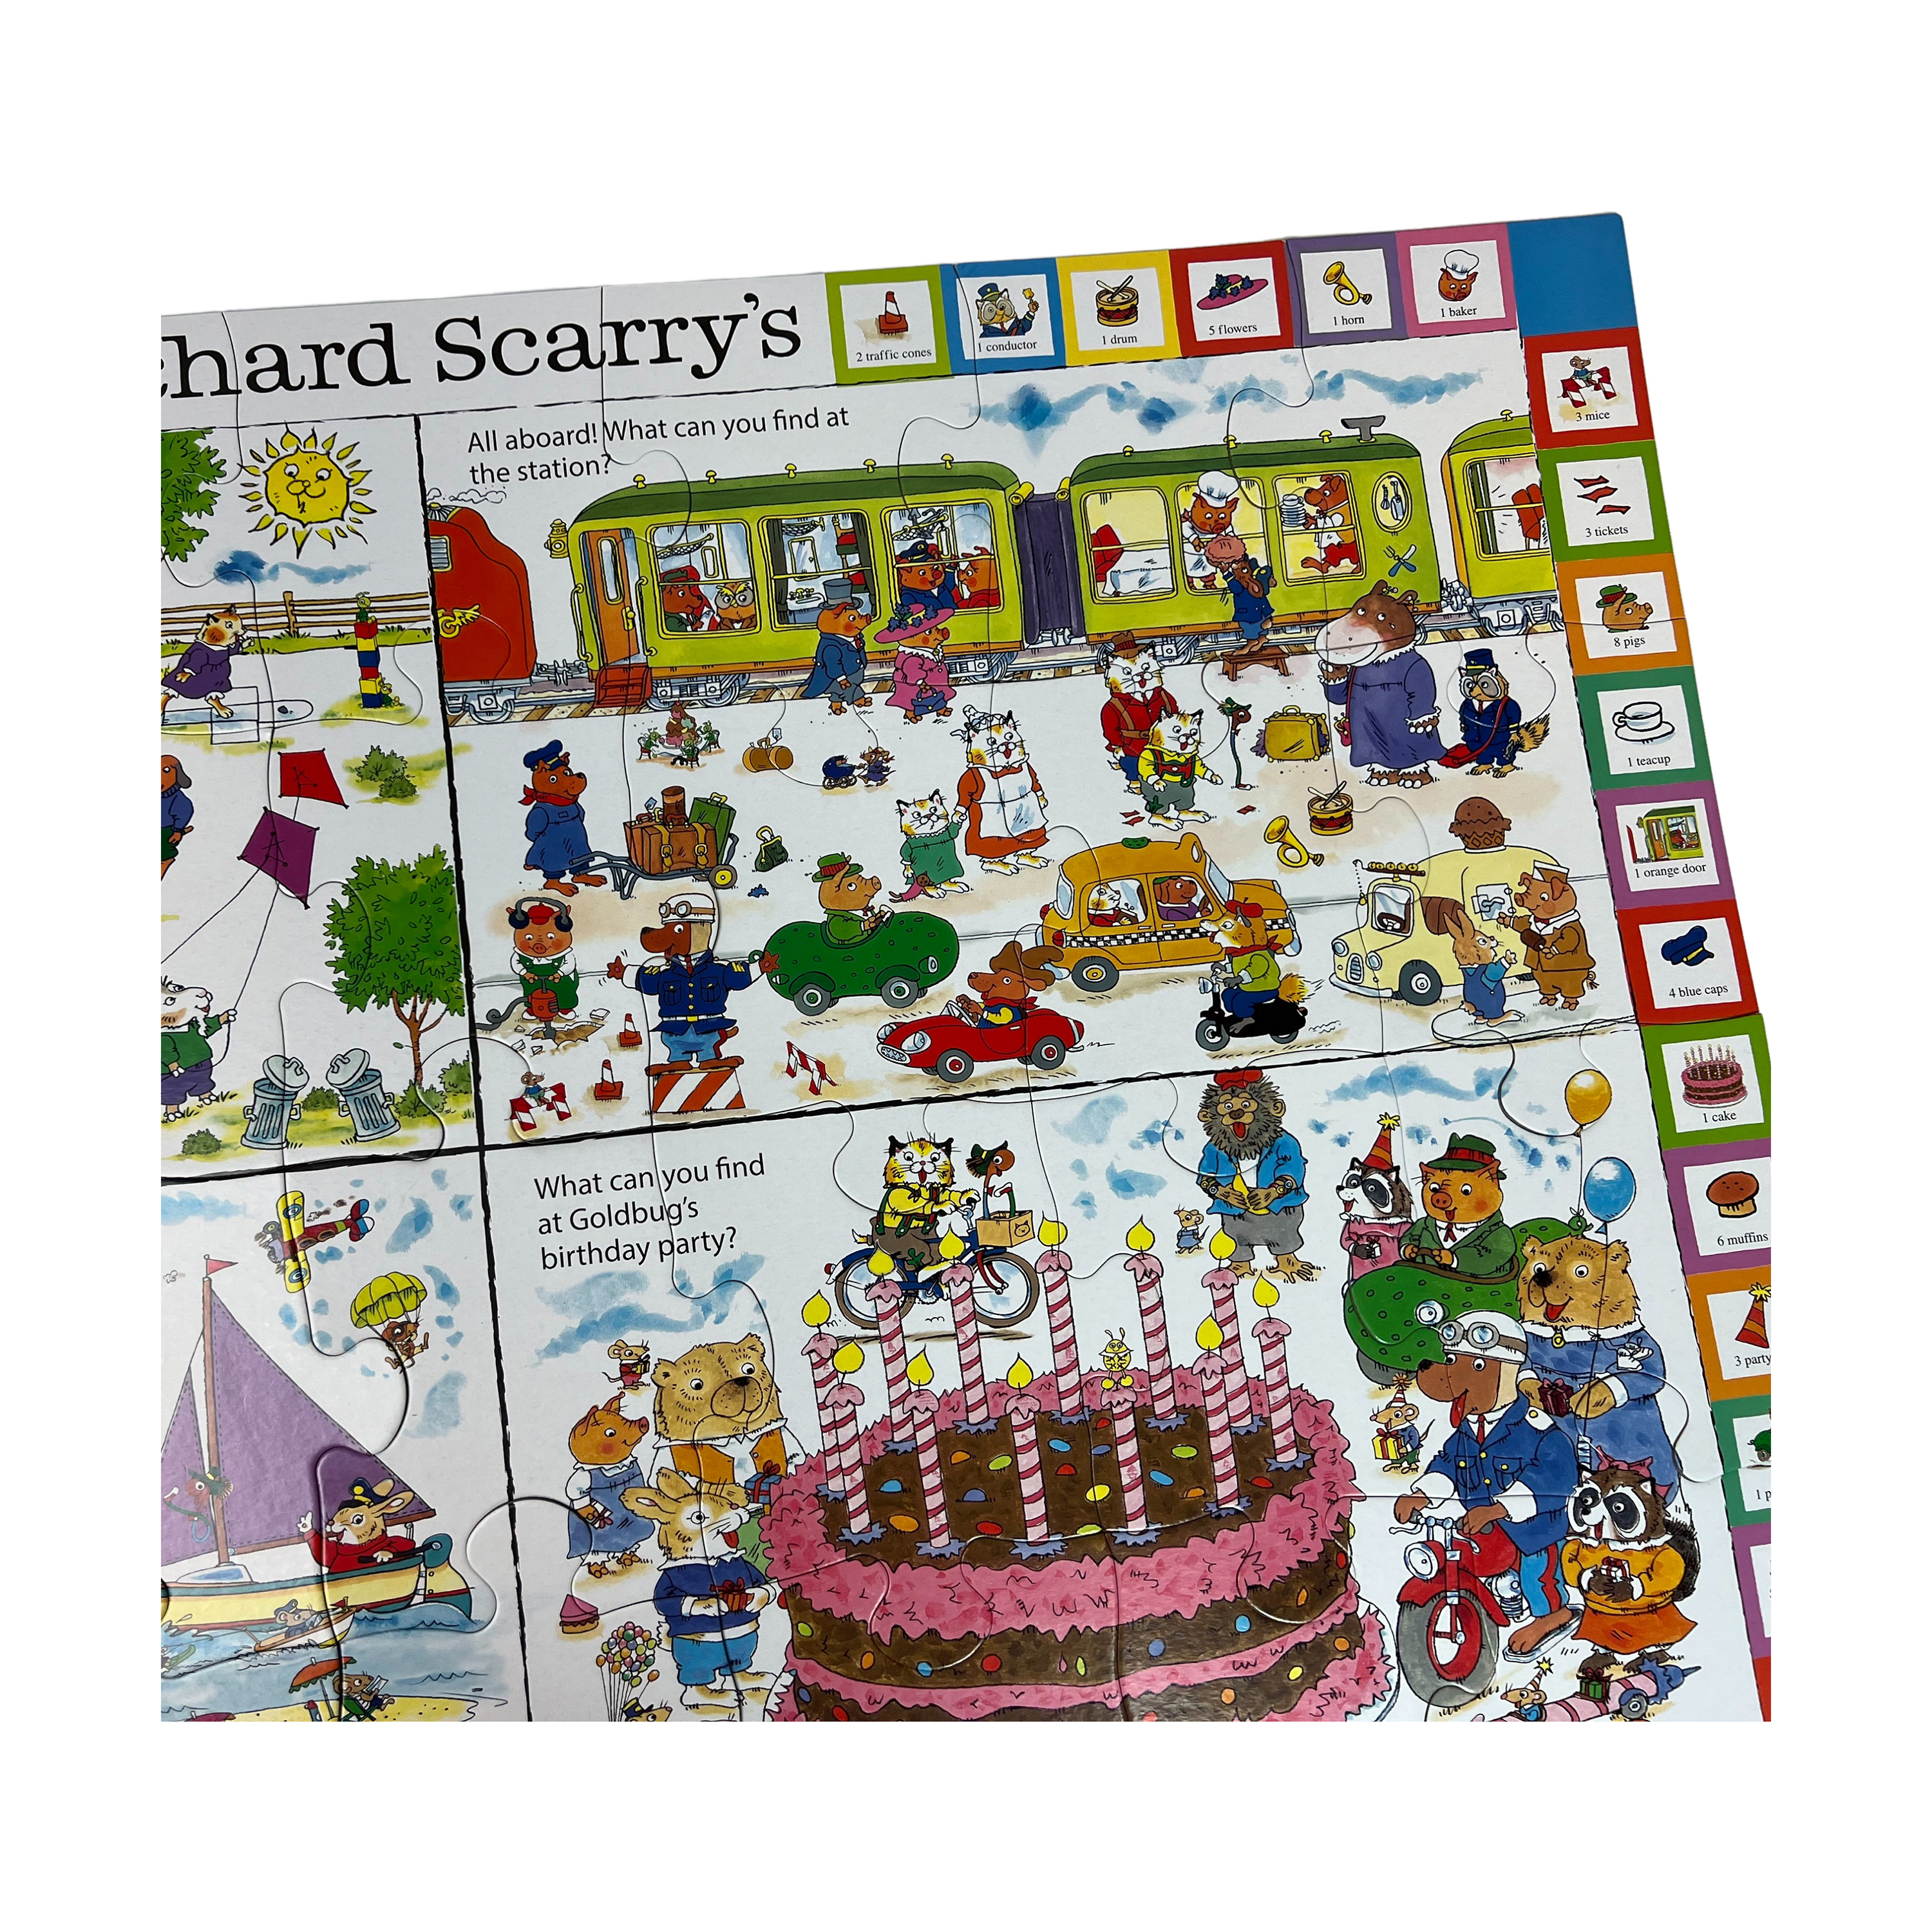 Briarpatch Richard Scarry's Busytown Seek and Find! Giant Floor Puzzle: 28 Pcs